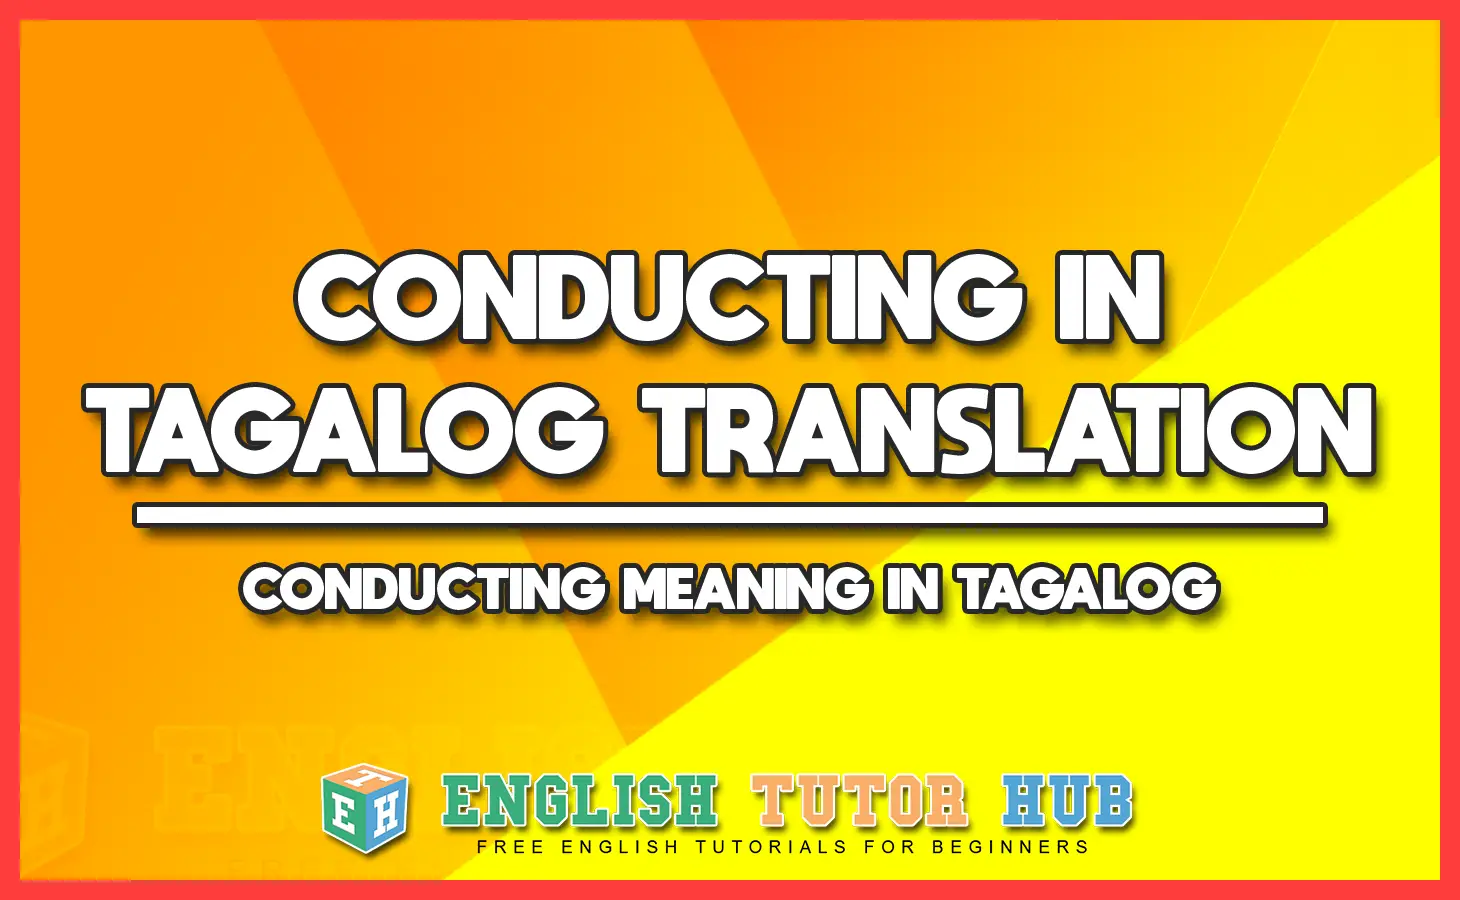 CONDUCTING IN TAGALOG TRANSLATION - CONDUCTING MEANING IN TAGALOG